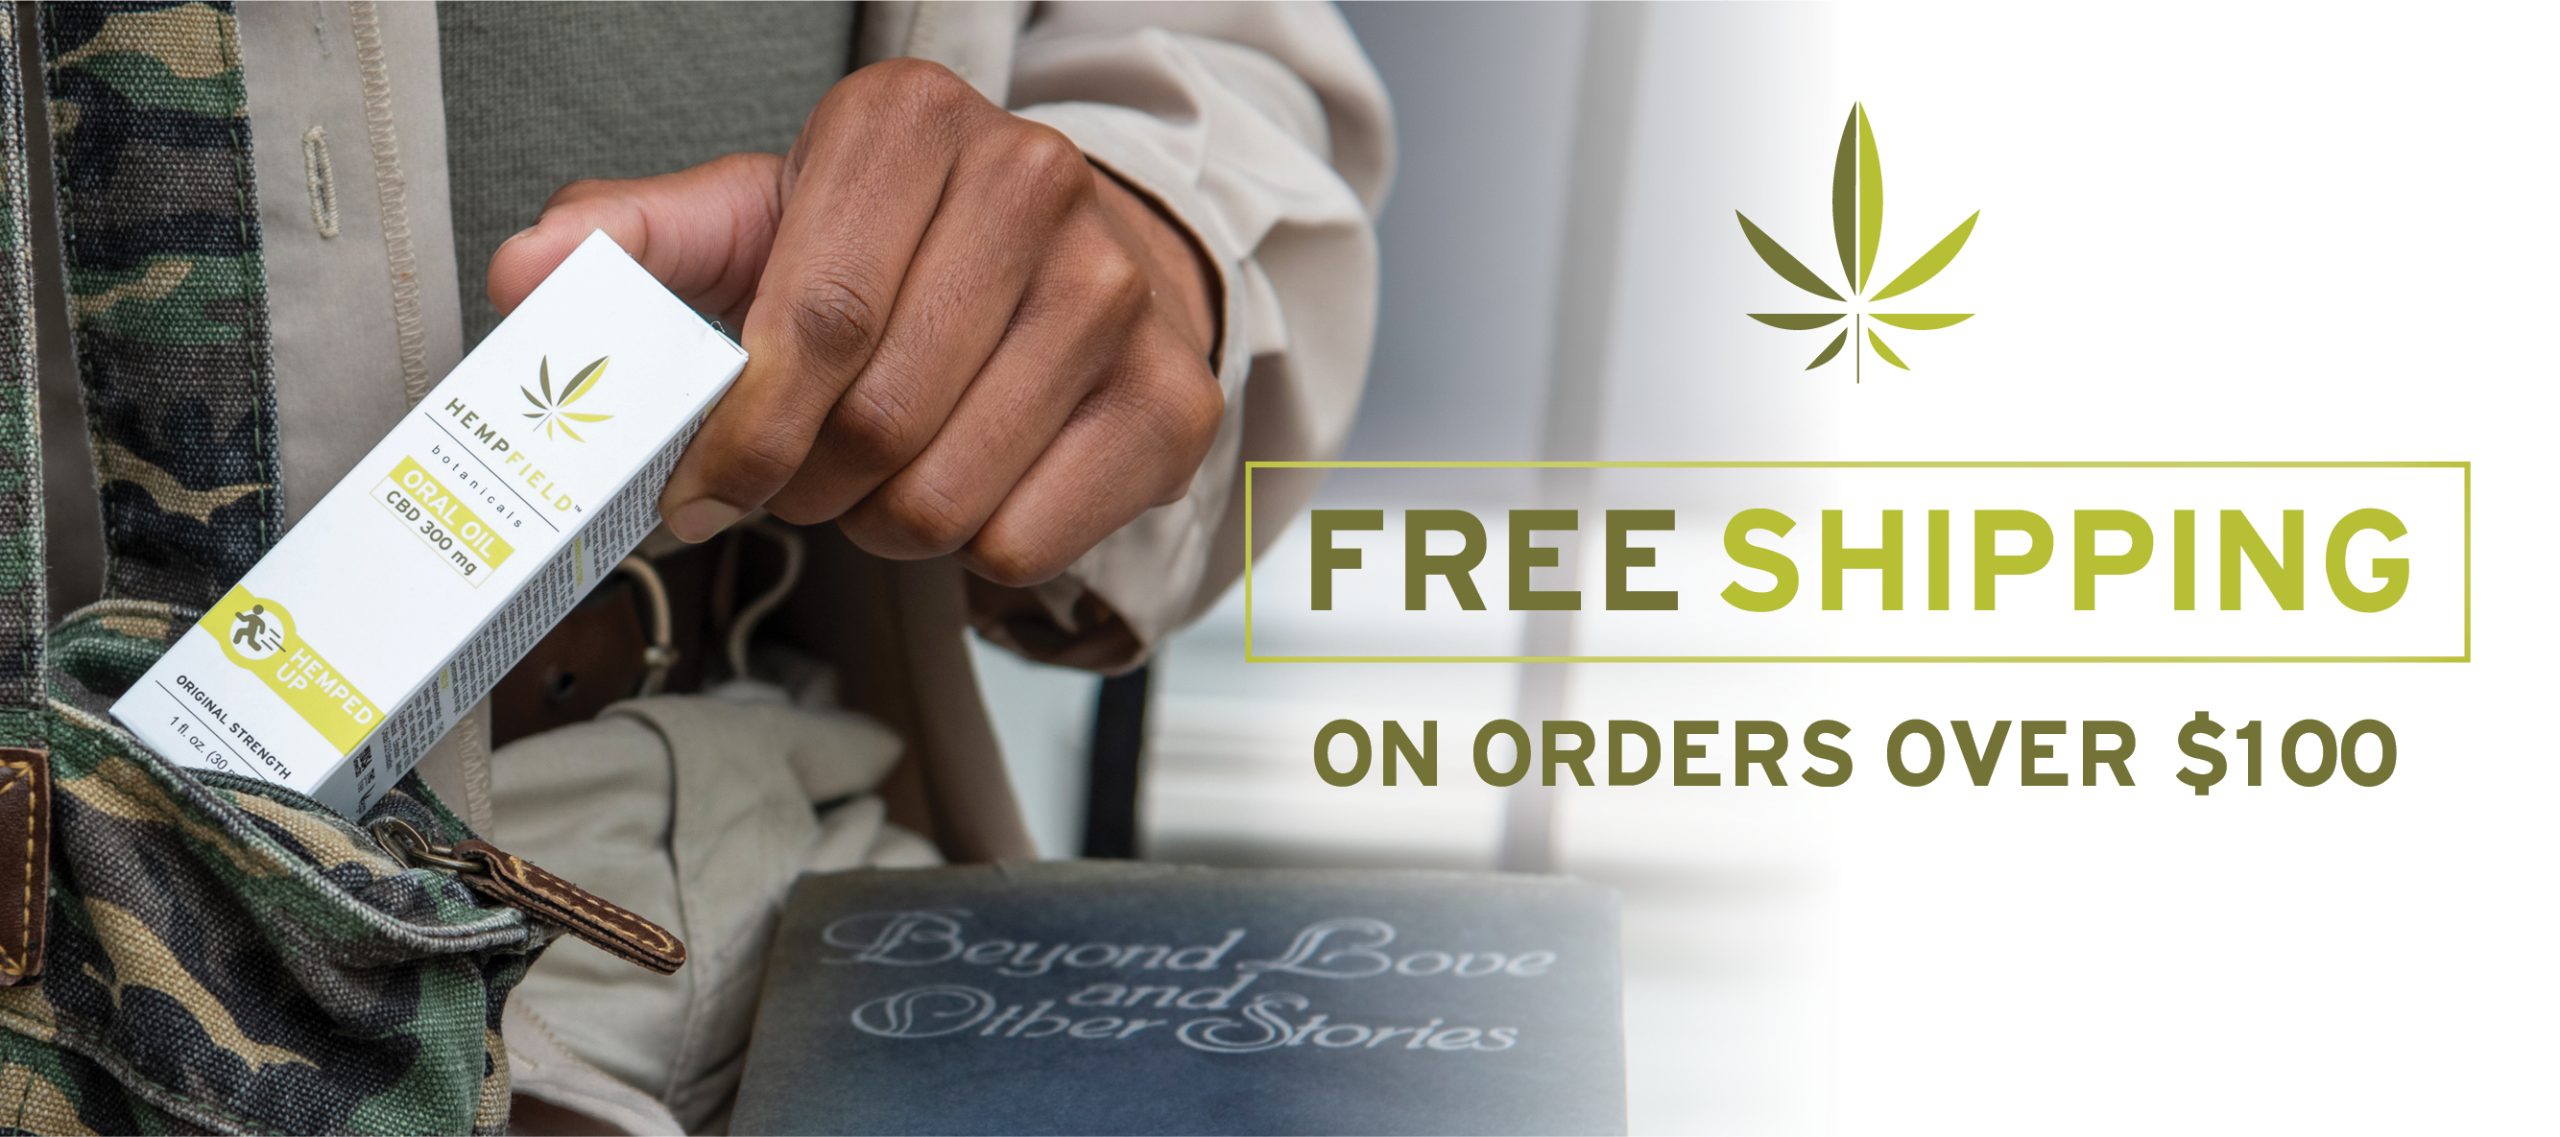 Free Shipping On Orders Over $99 | Hempfield Botanicals